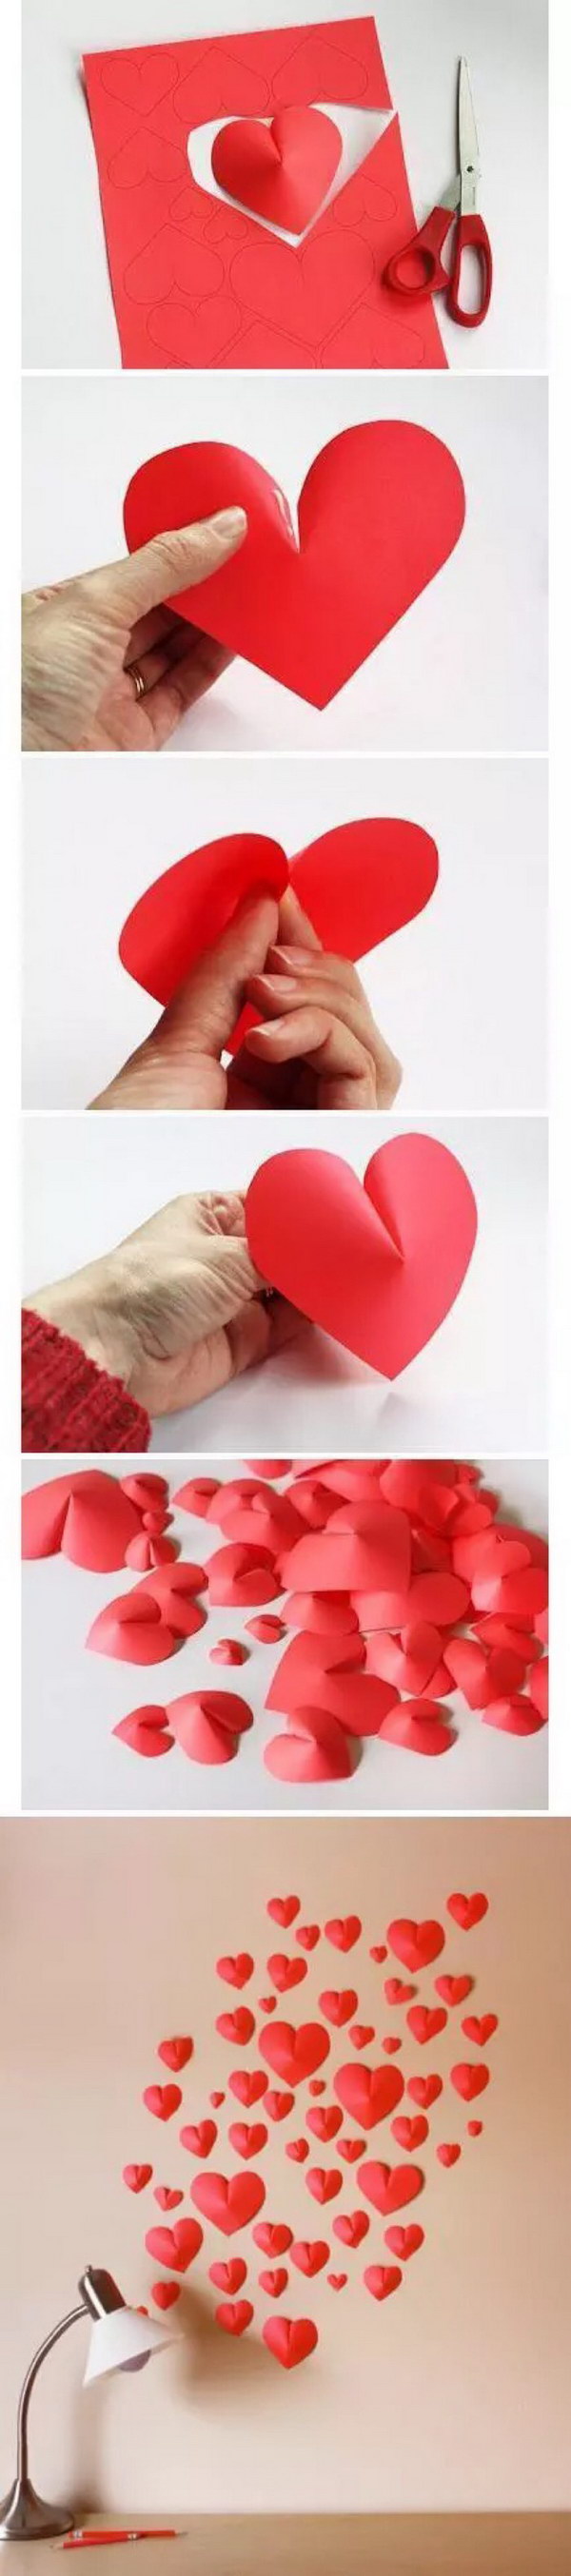 3D Paper Heart Valentine's Day Wall Decor 